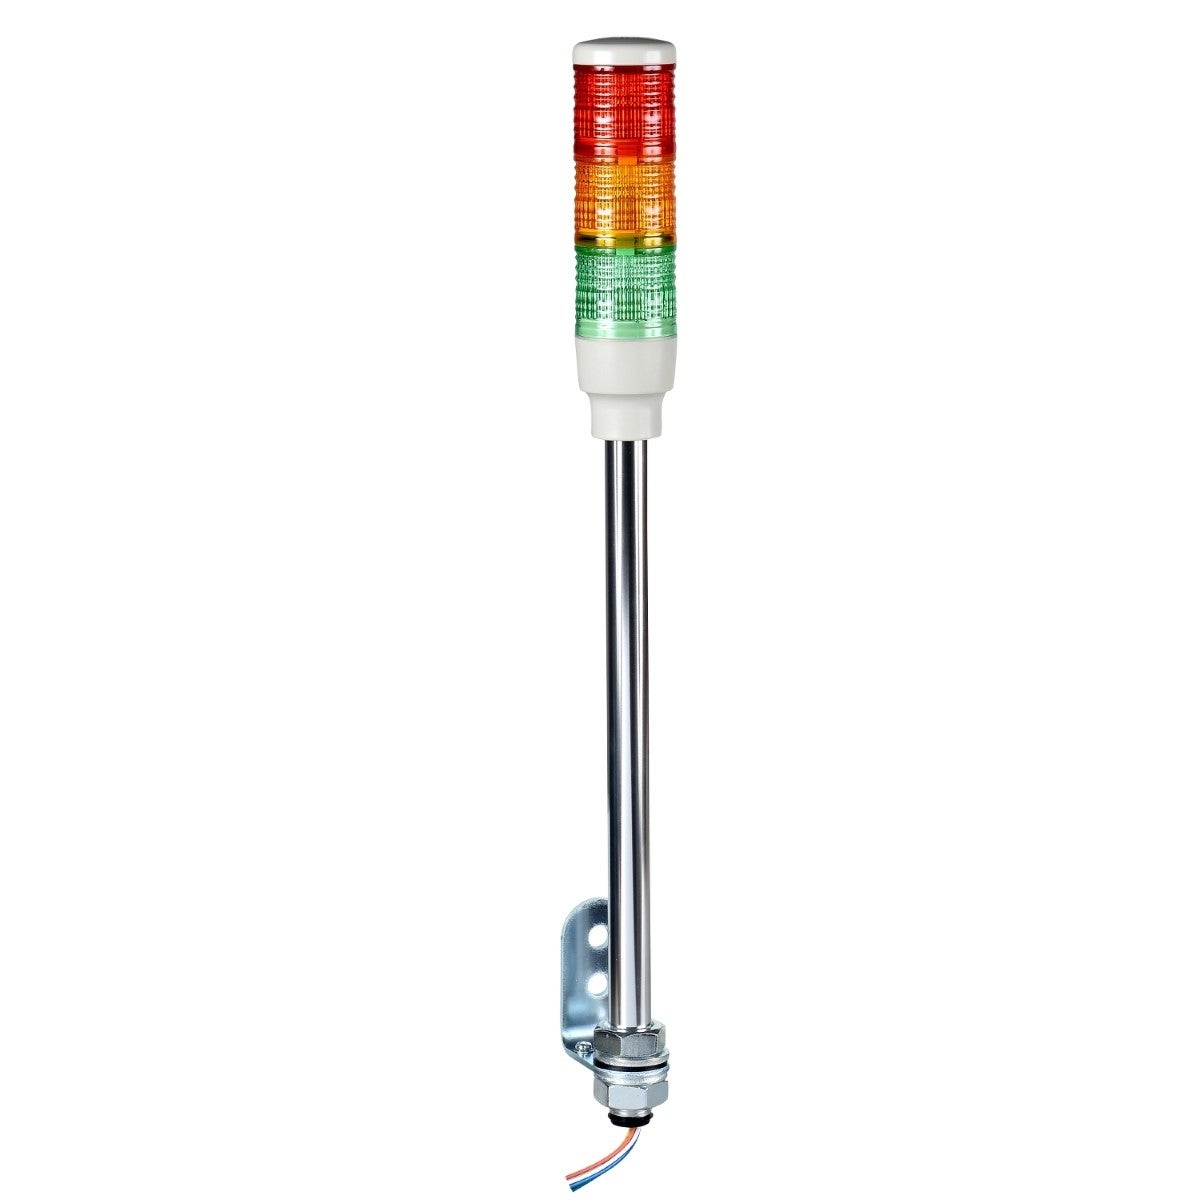 Harmony XVC, Monolithic precabled tower light, plastic, red orange green, Ø40, tube mounting, steady, IP23, 100...240 V AC